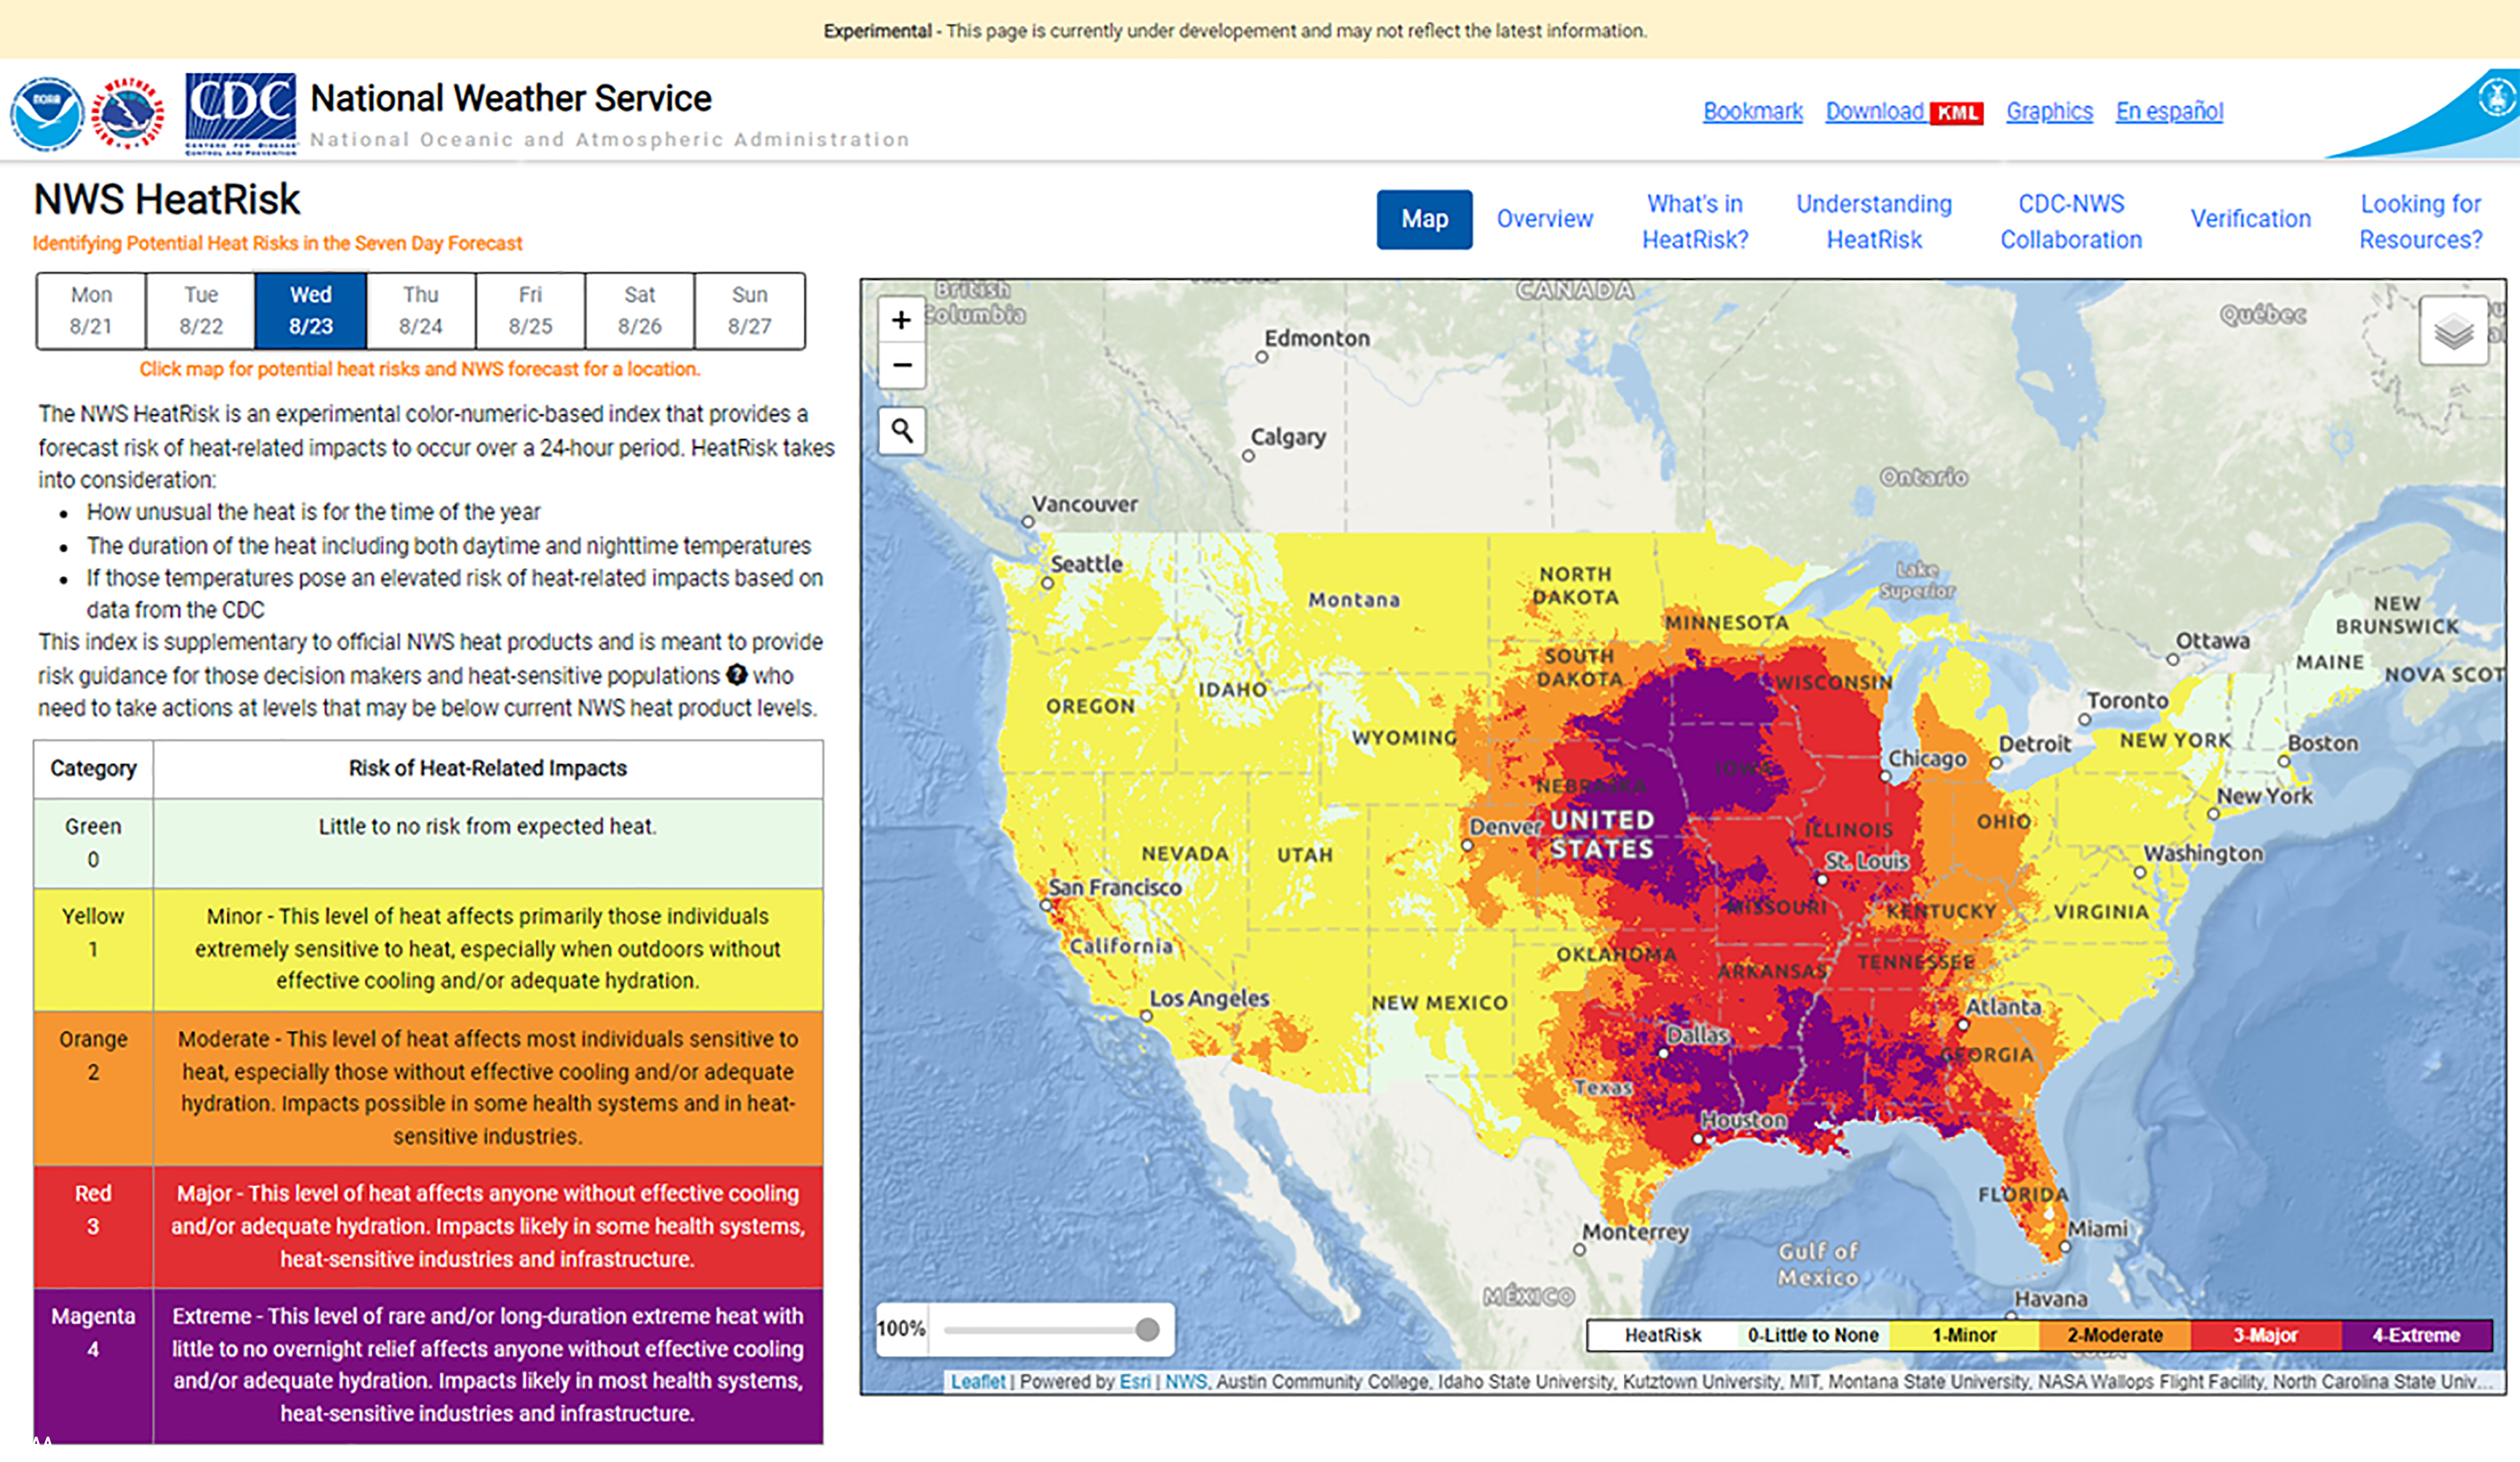 The National Weather Service's HeatRisk tool experimental site for the contiguous US combines NWS forecasts with CDC heat data to identify potentially dangerous heat.